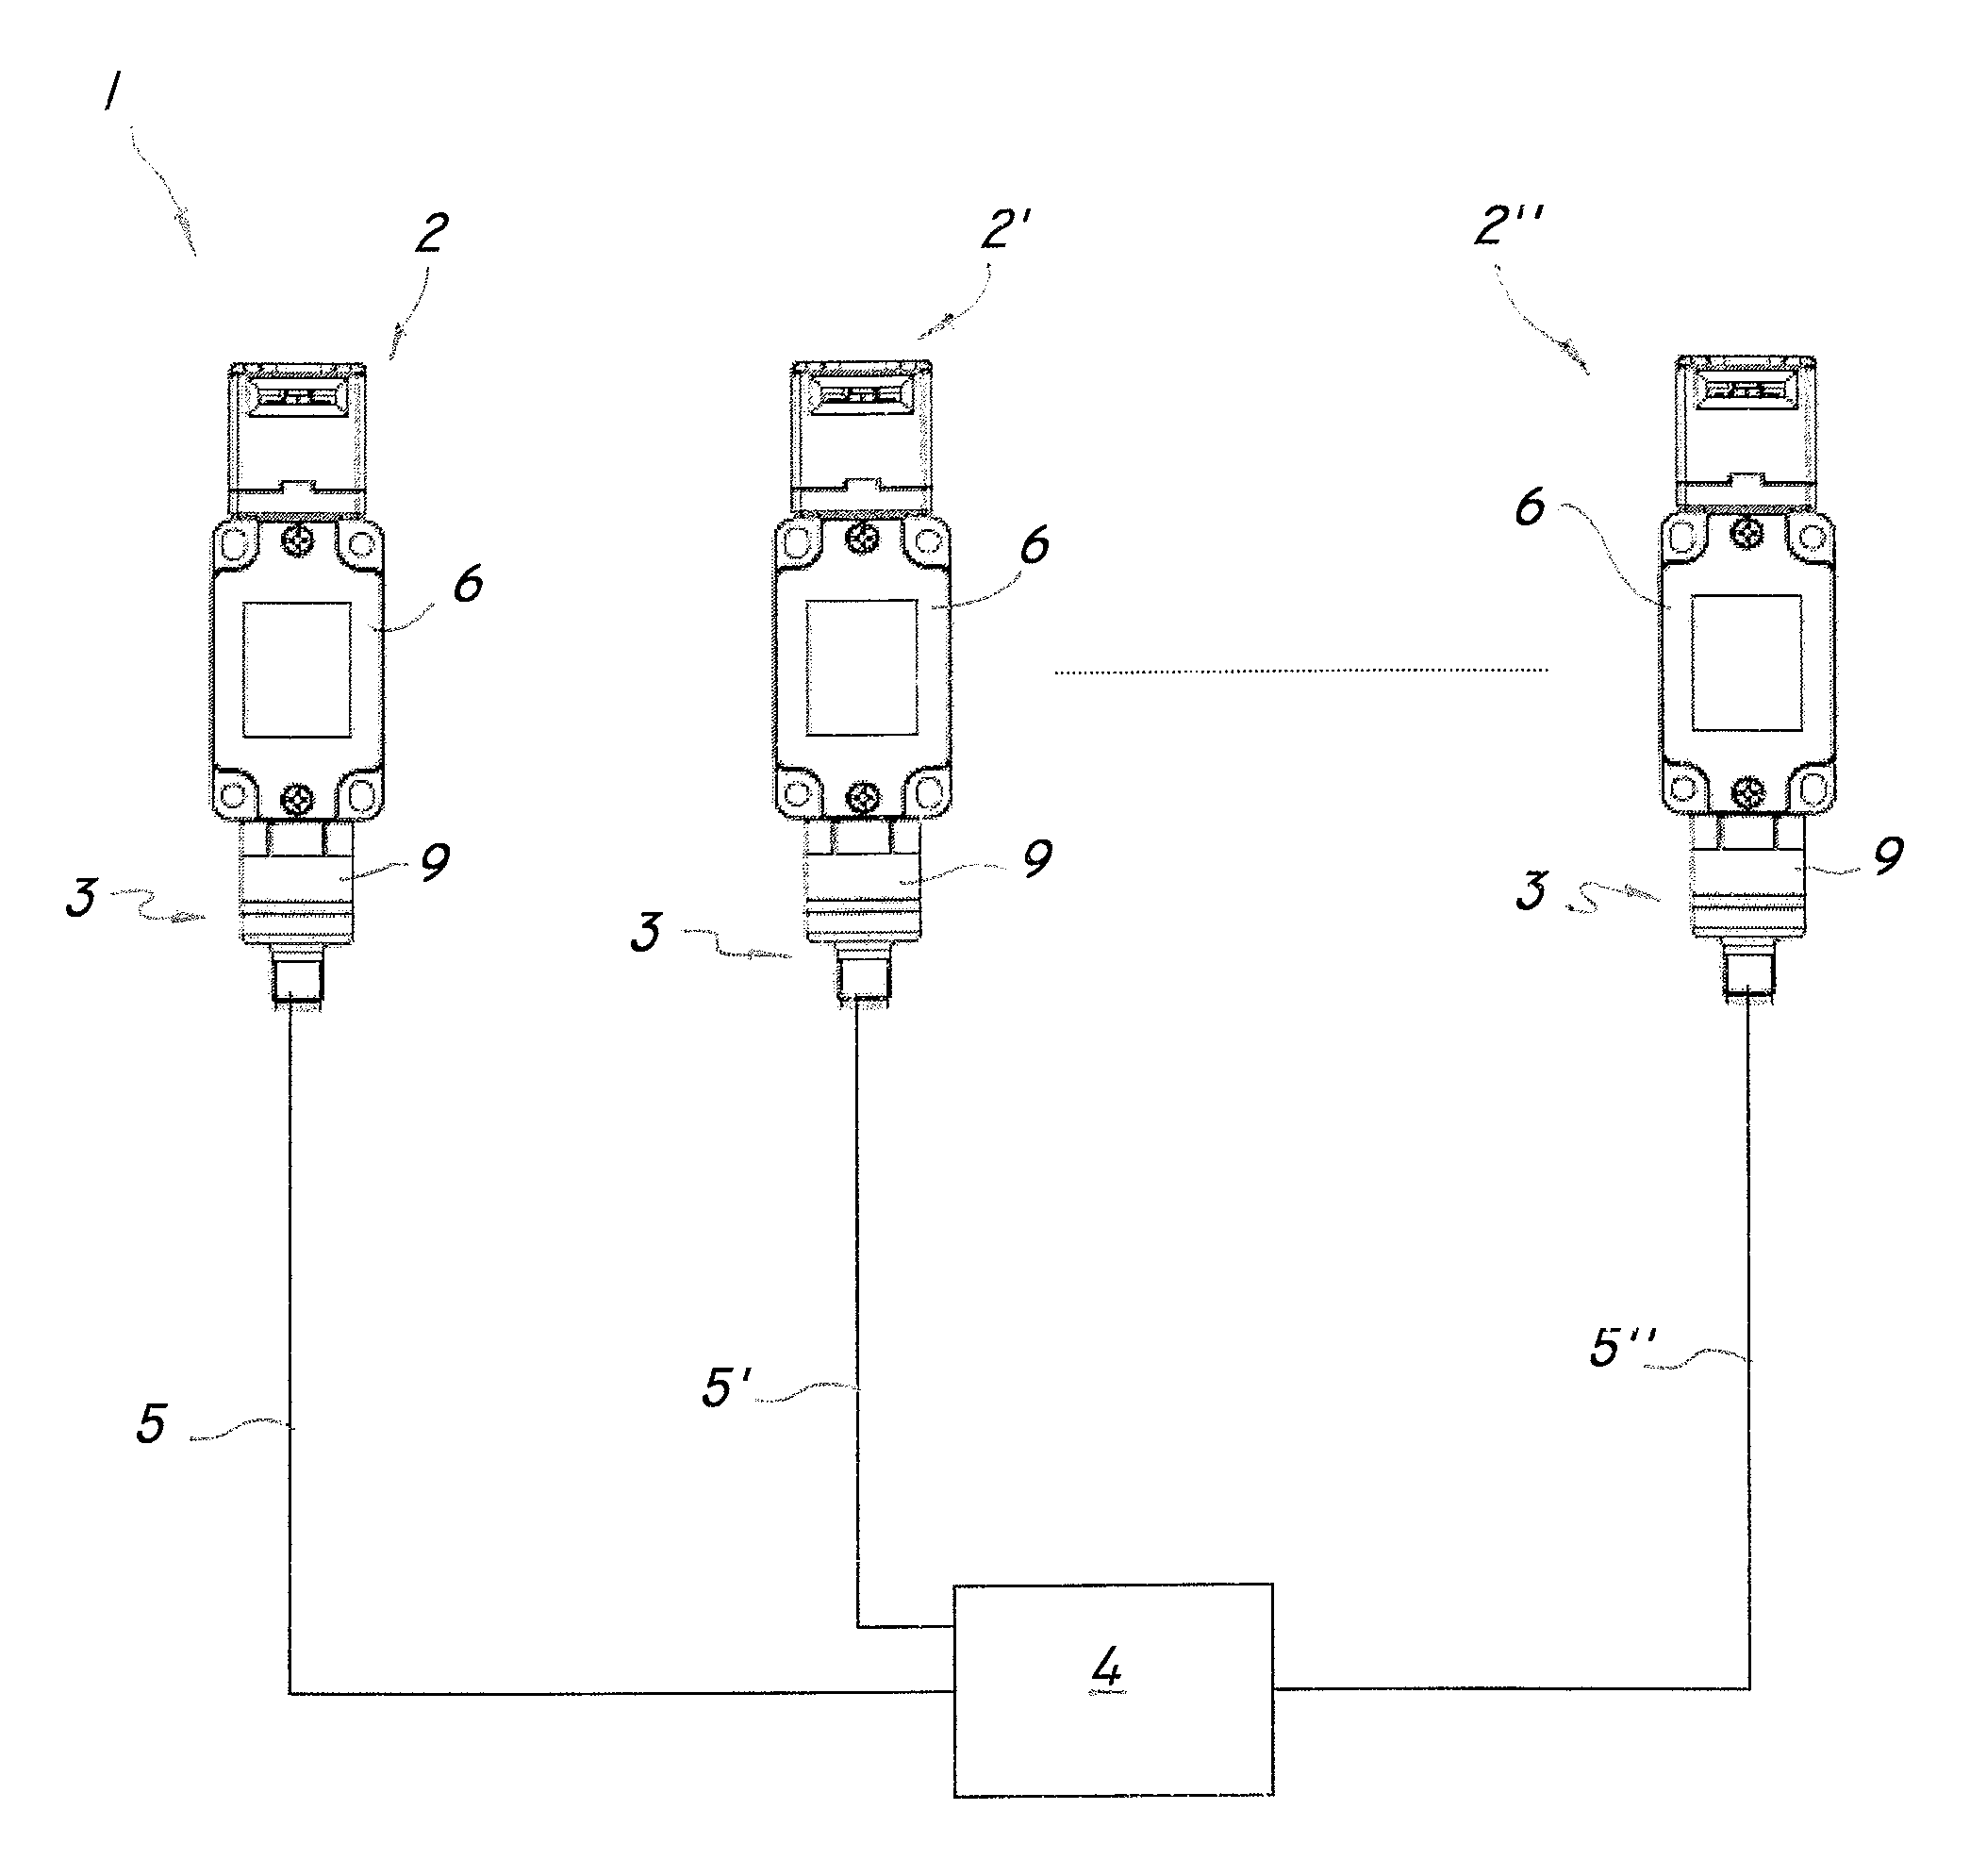 Adapter for connecting a switch device to a data bus and switch assembly comprising the adapter